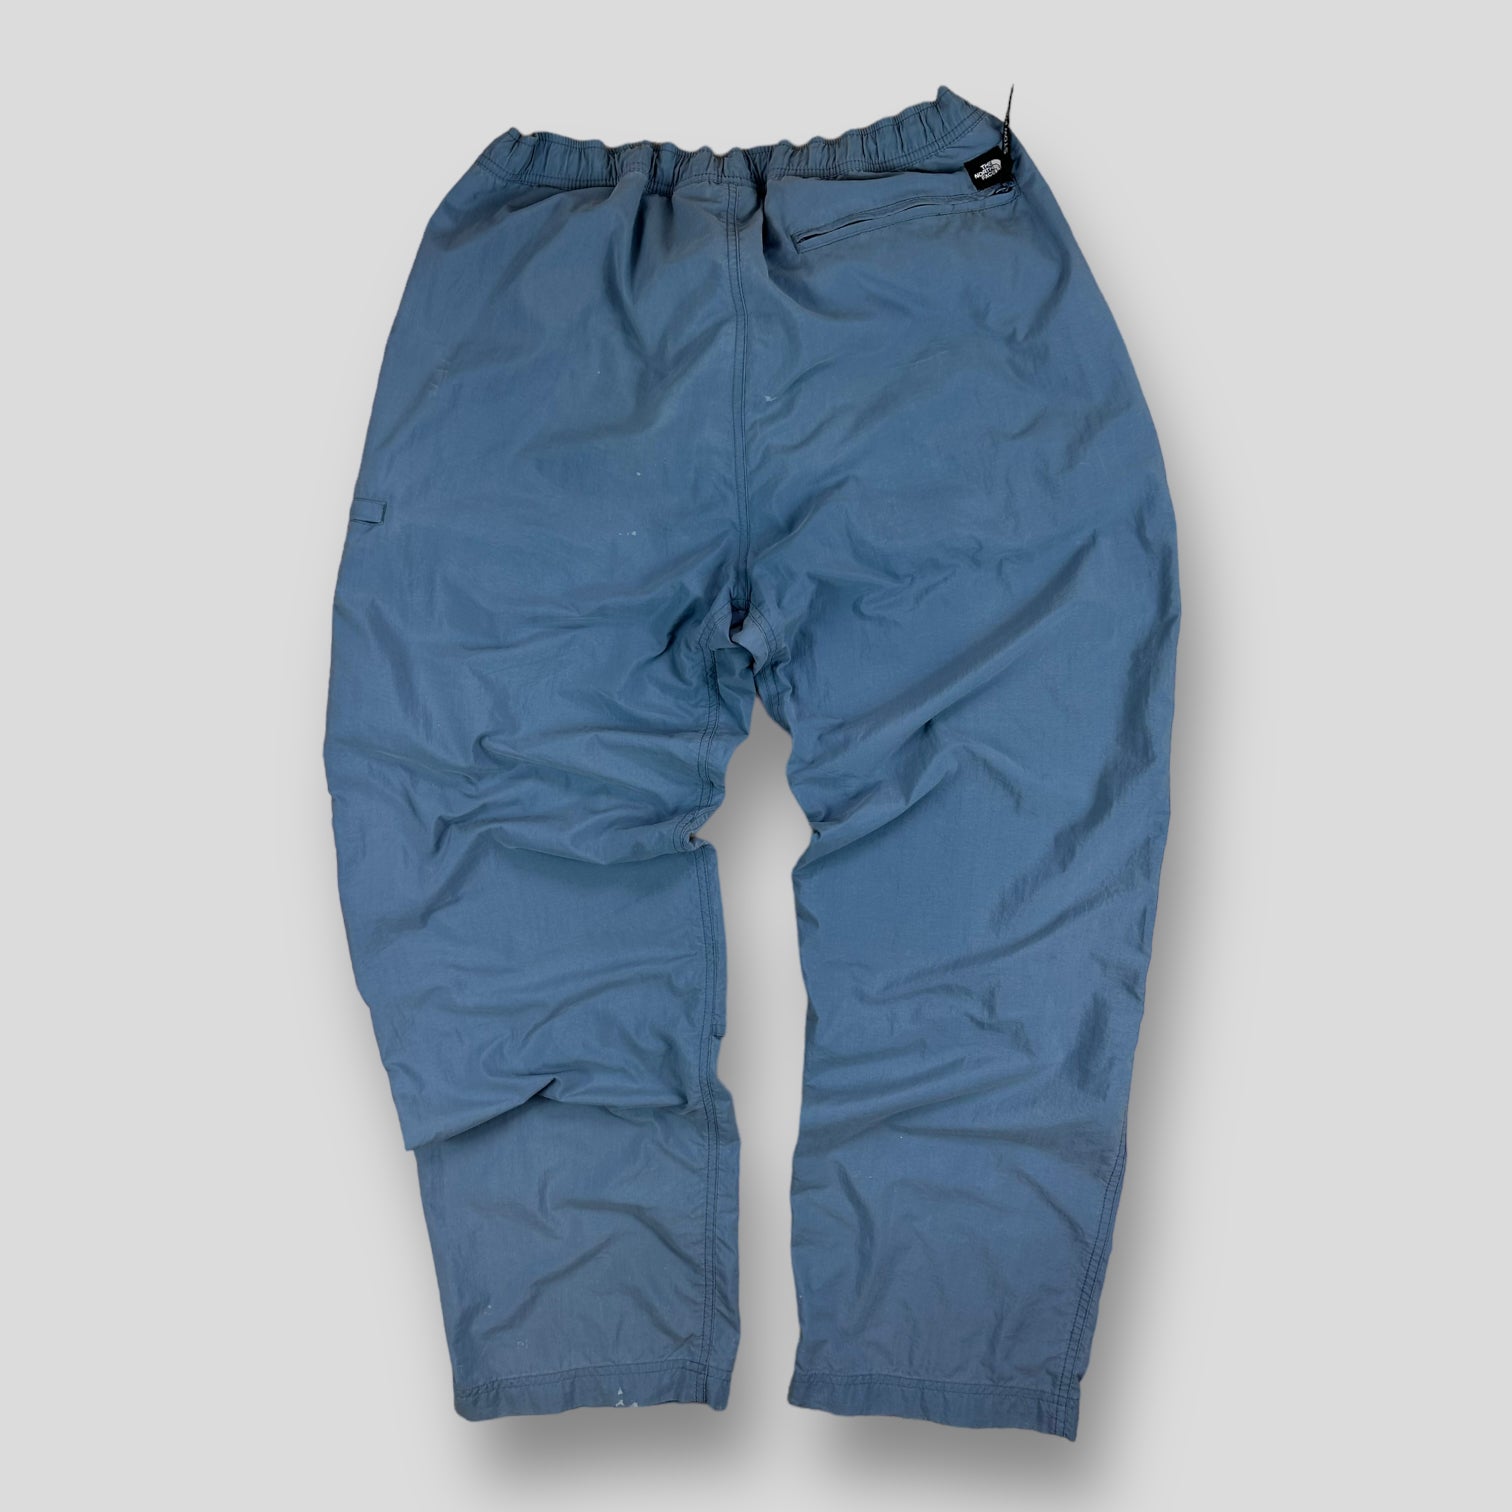 North face trouser